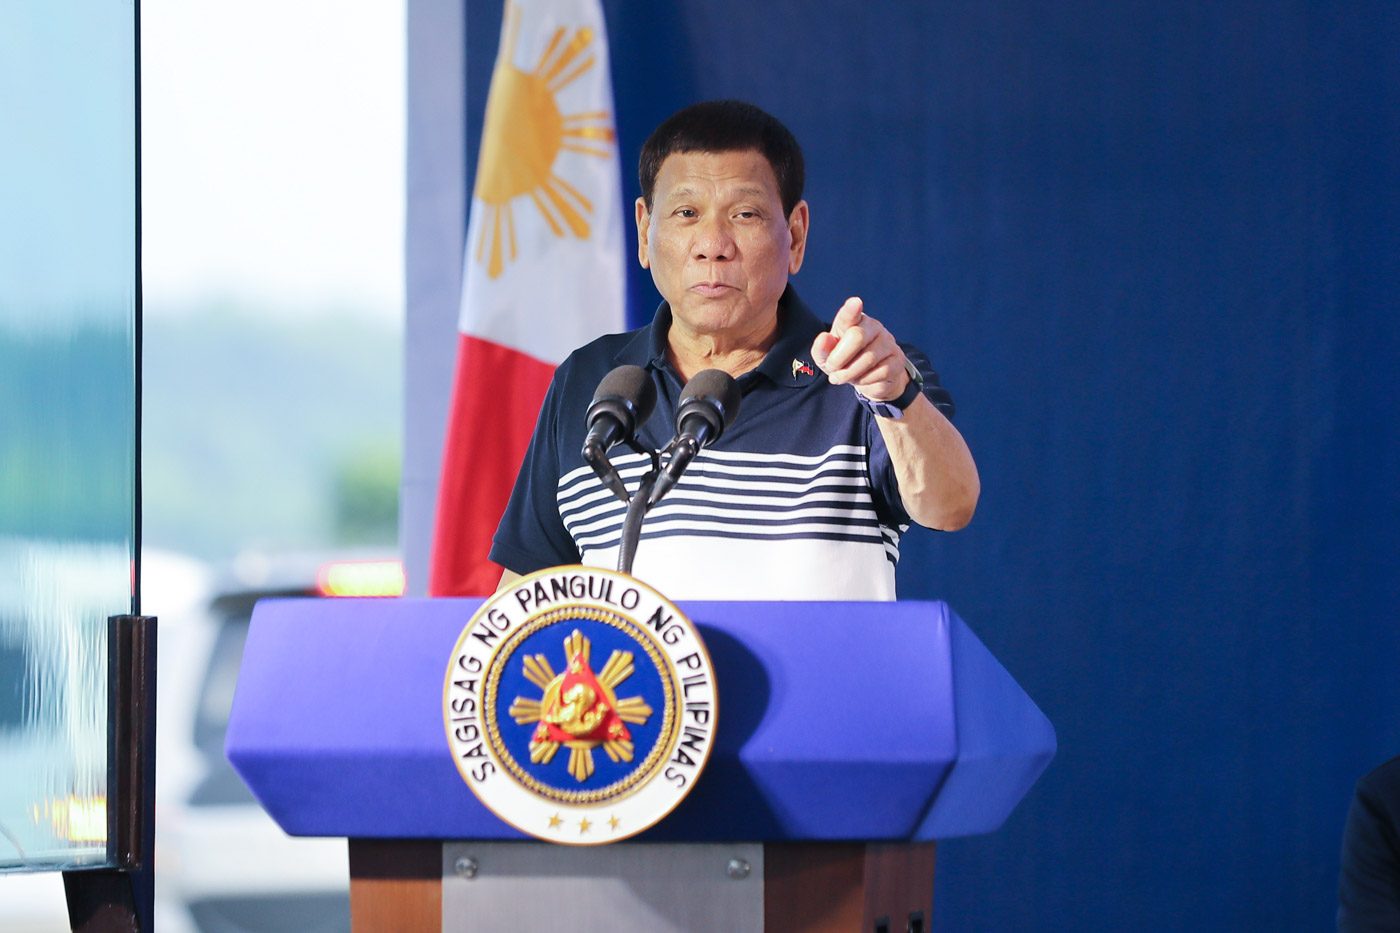 ‘His word is law’: A list of Duterte’s verbal-only orders